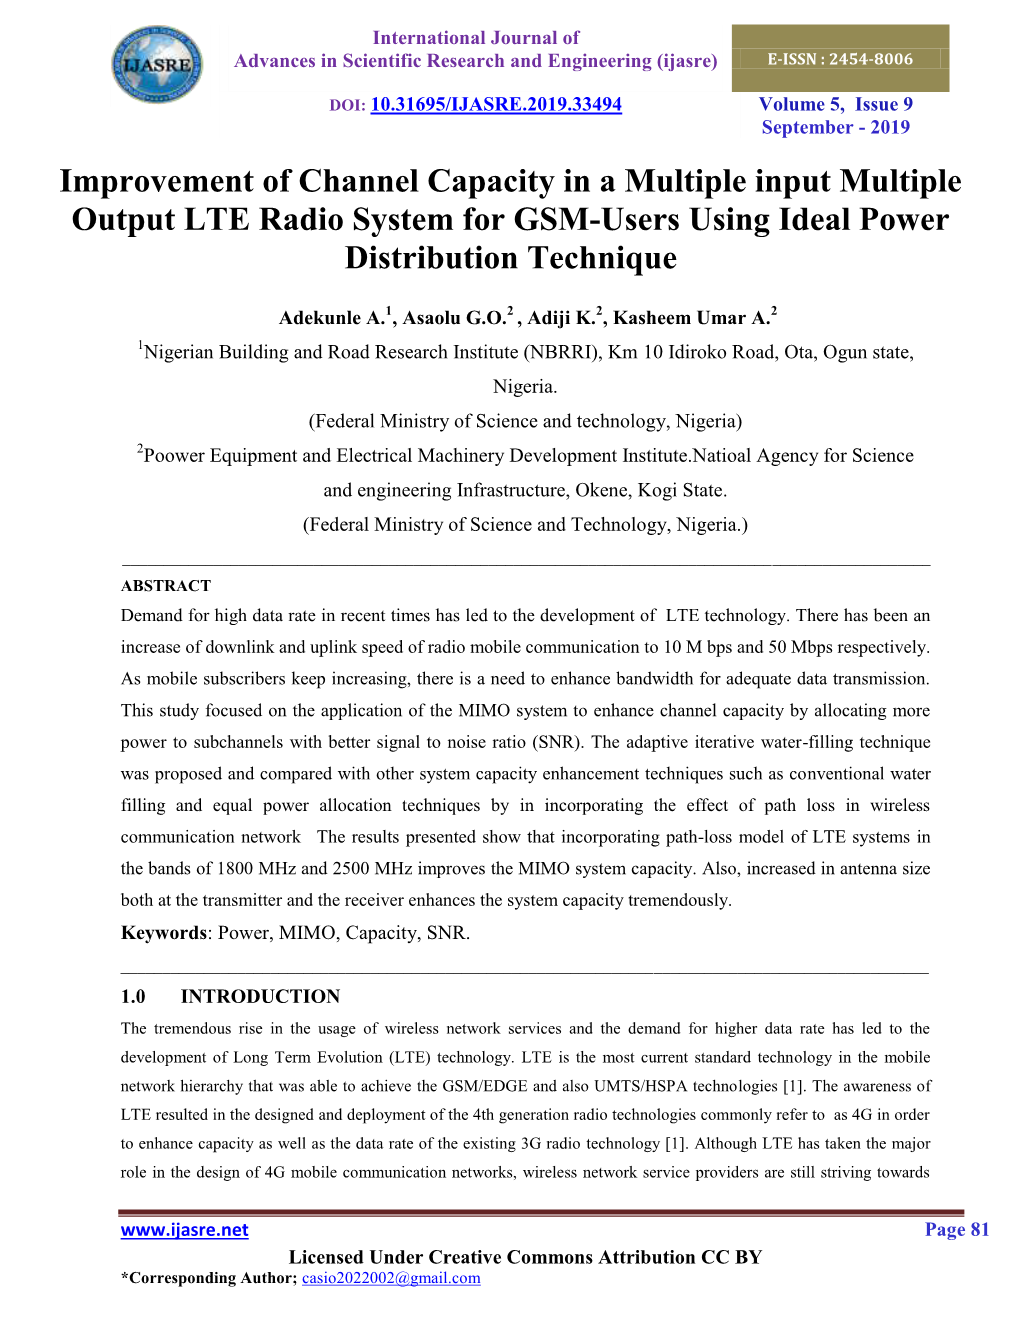 Improvement of Channel Capacity in a Multiple Input Multiple Output LTE Radio System for GSM-Users Using Ideal Power Distribution Technique